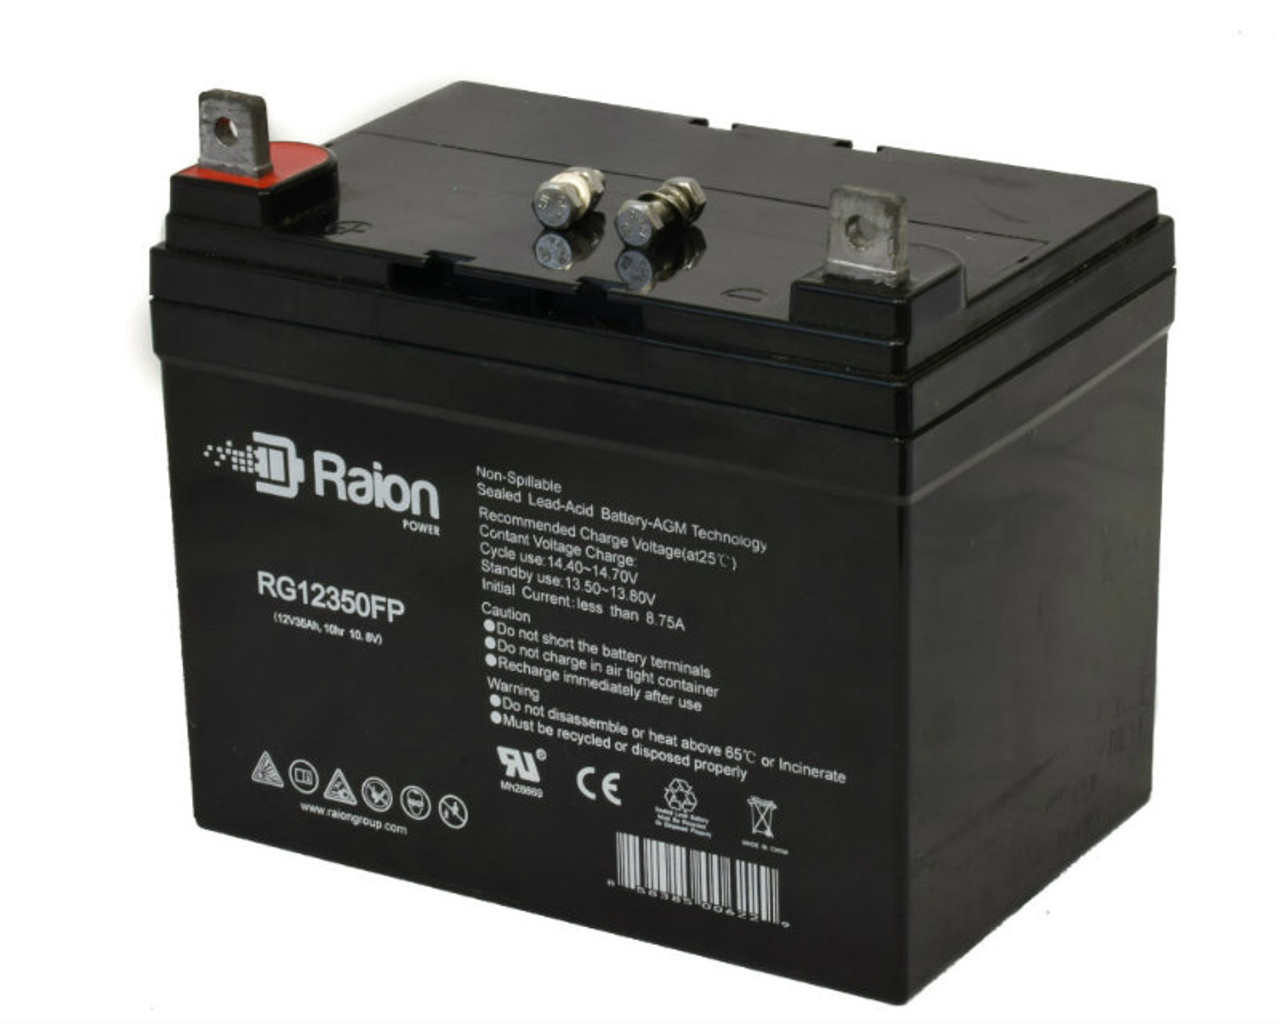 Raion Power Replacement 12V 35Ah RG12350FP Battery for Root MFG Co. 830-E